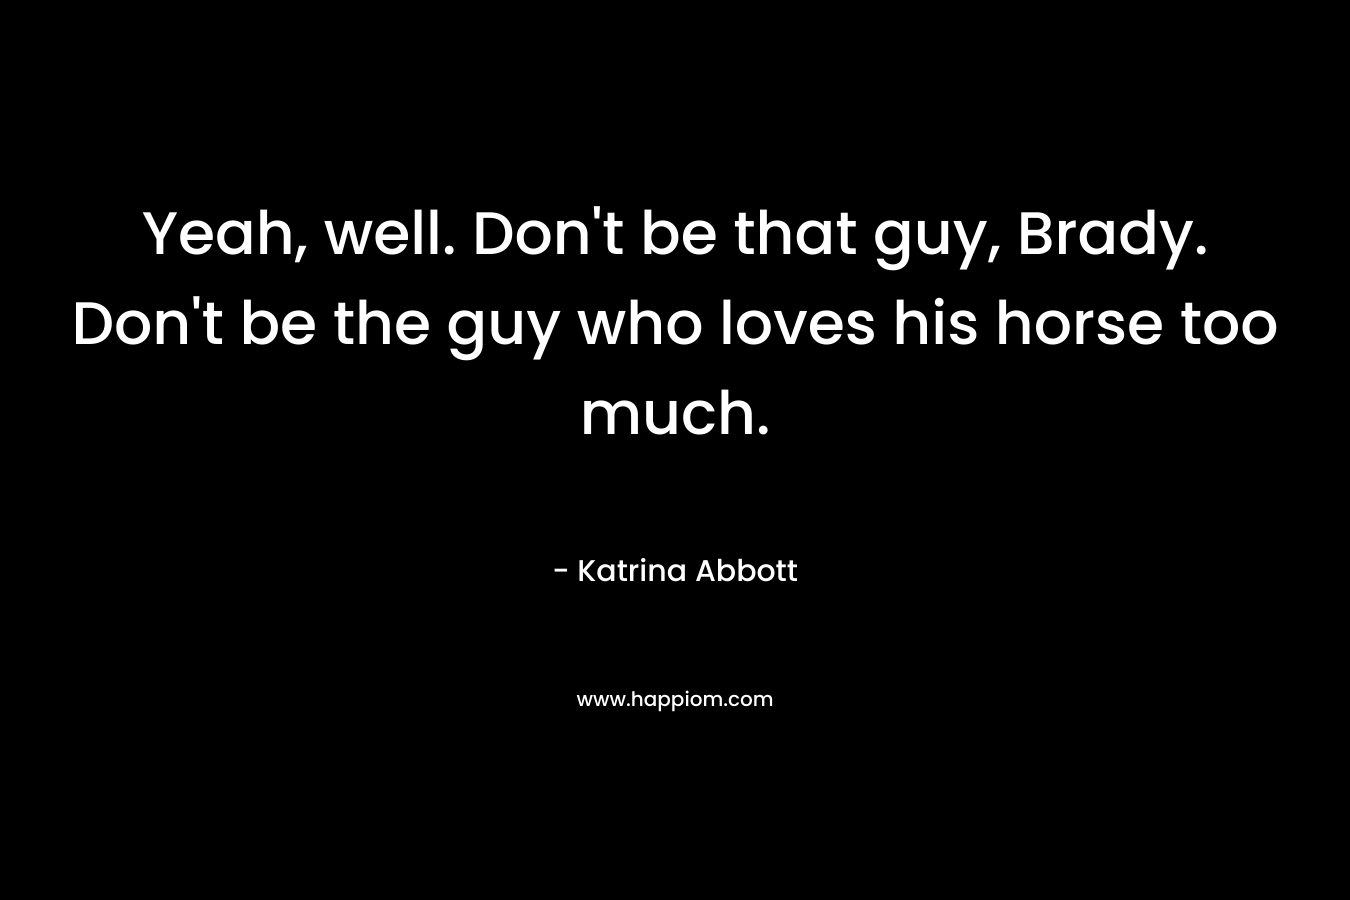 Yeah, well. Don't be that guy, Brady. Don't be the guy who loves his horse too much.